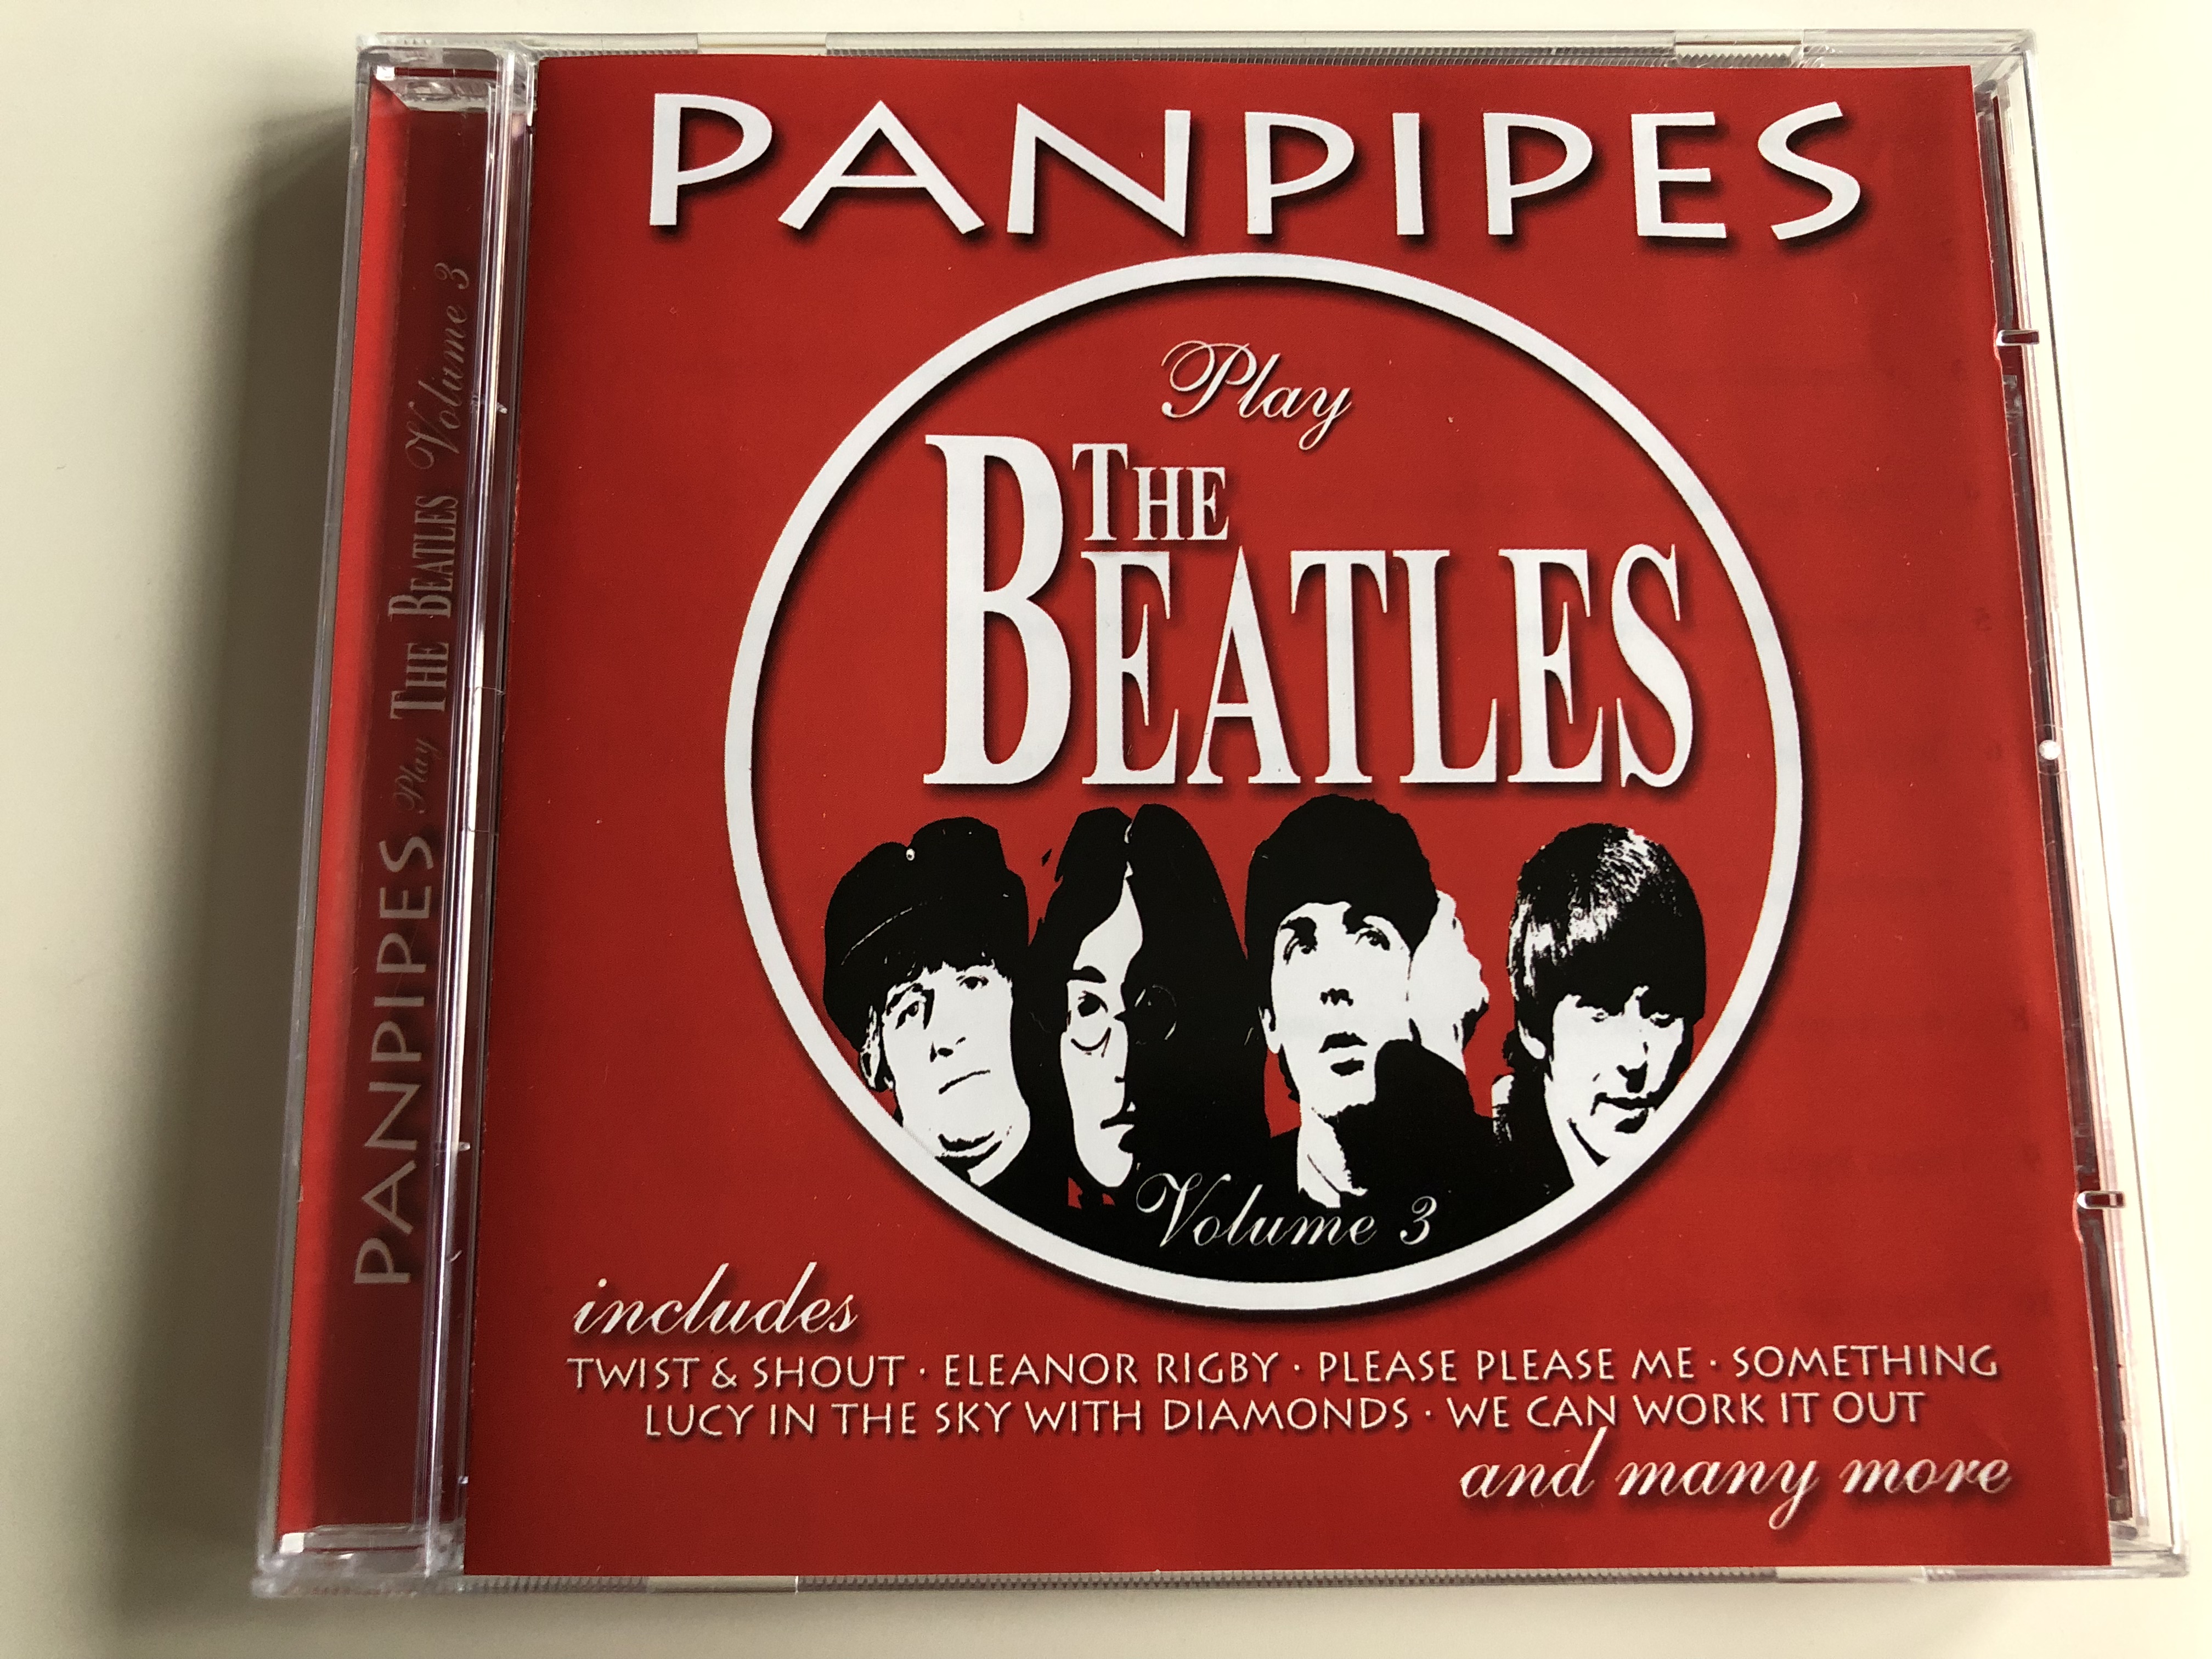 panpipes-play-the-beatles-vol.-3-includes-twist-shout-eleanor-rigby-please-please-me-something-we-can-work-it-out-audio-cd-2000-musicbank-apwcd1041-1-.jpg